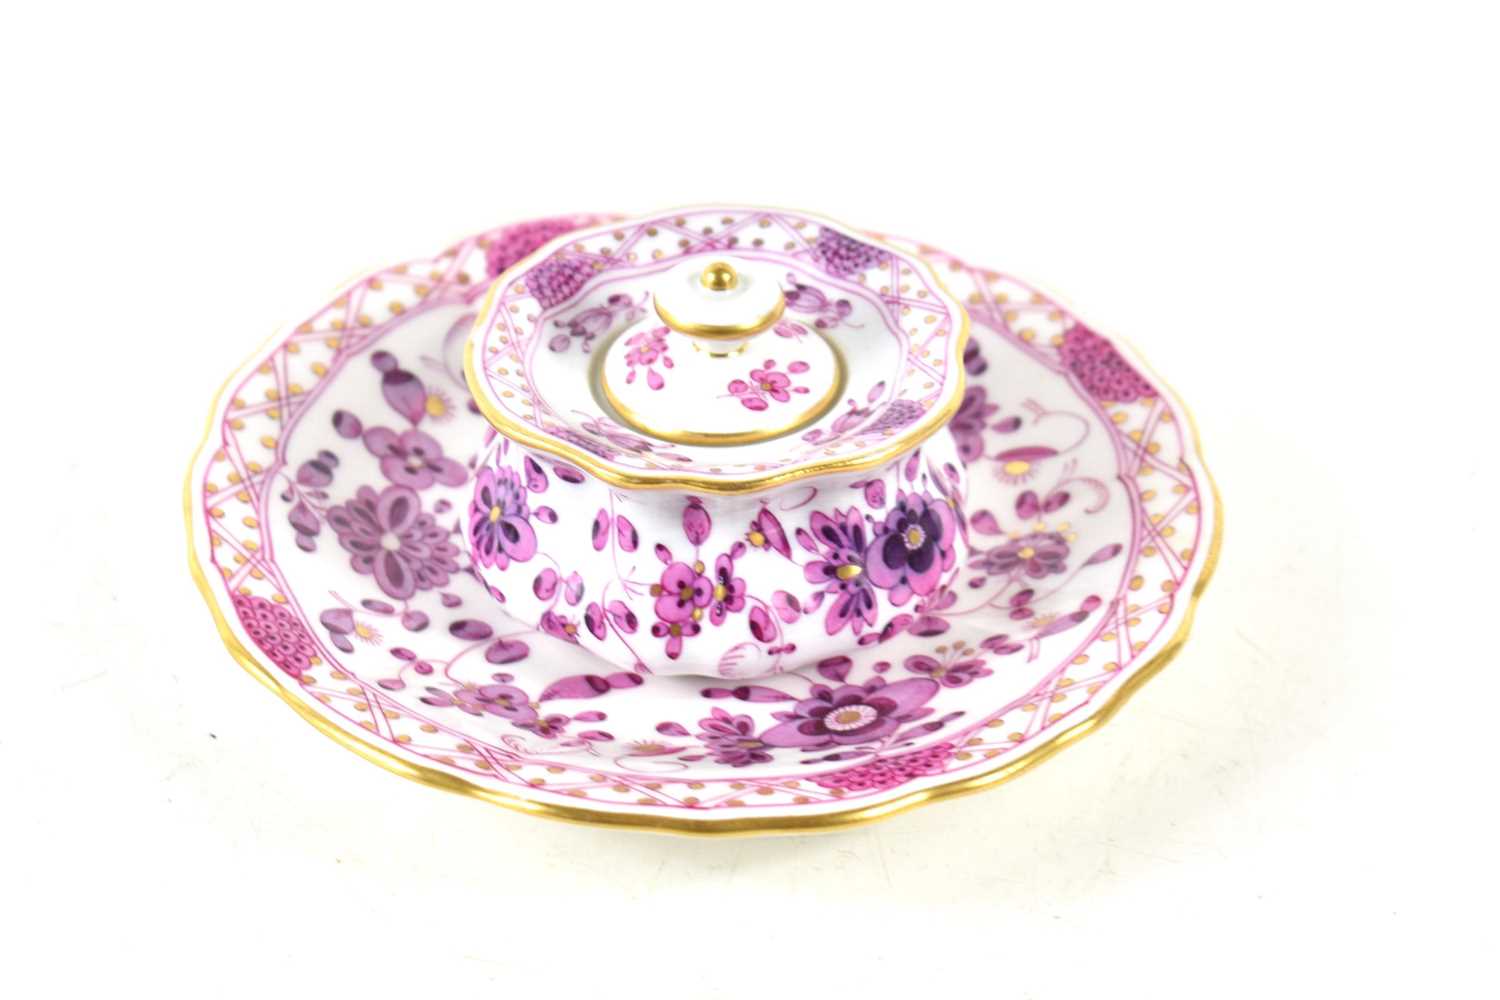 A Meissen lidded pot and saucer, decorated in a detailed purple floral pattern with gilding to the - Image 3 of 4